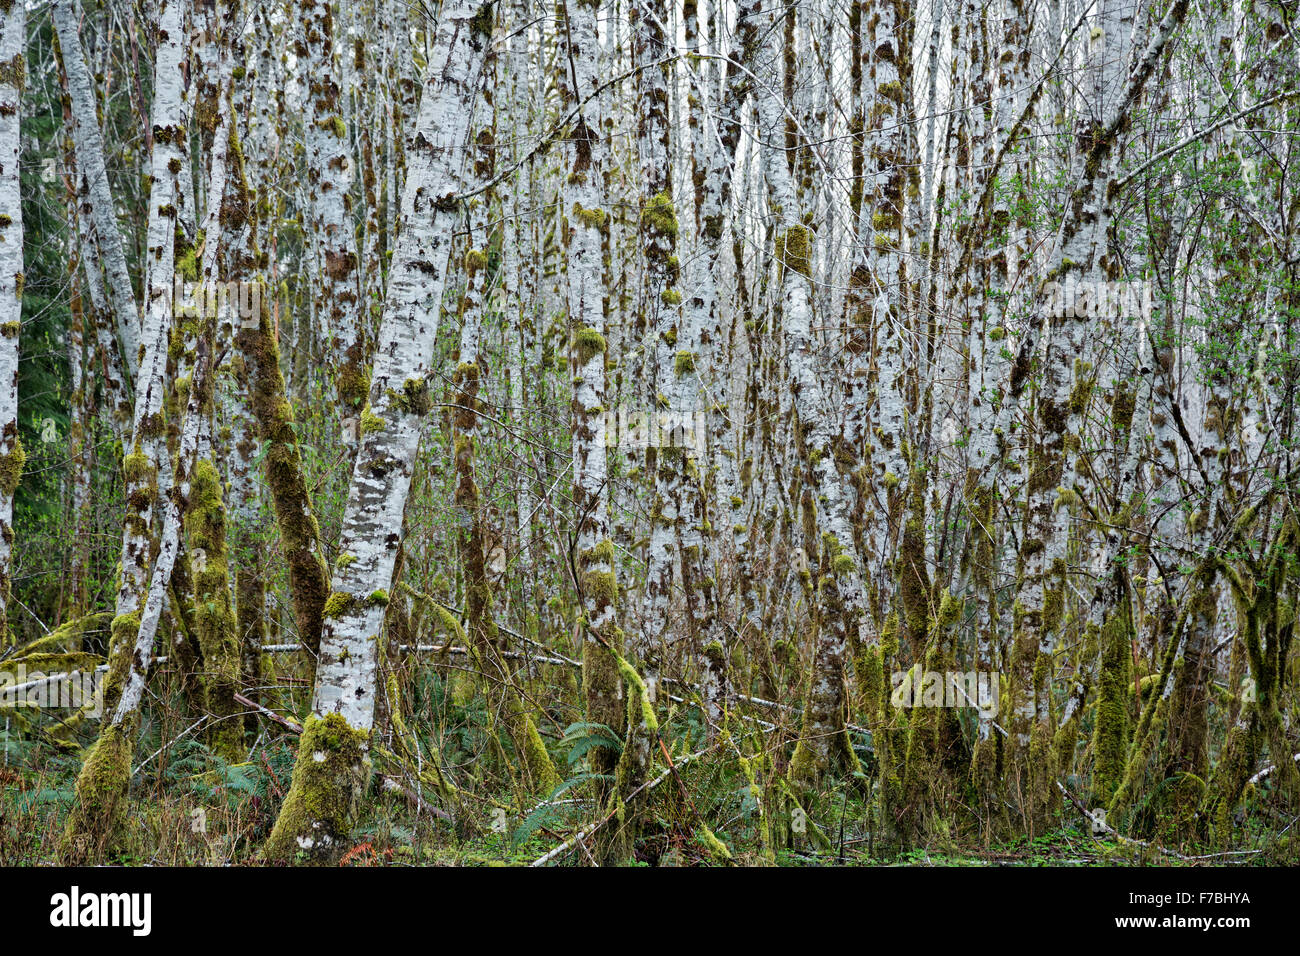 WASHINGTON - A tangled stand of mossy birch trees growing in the temperate rain forest environment along the Hoh River Road. Stock Photo